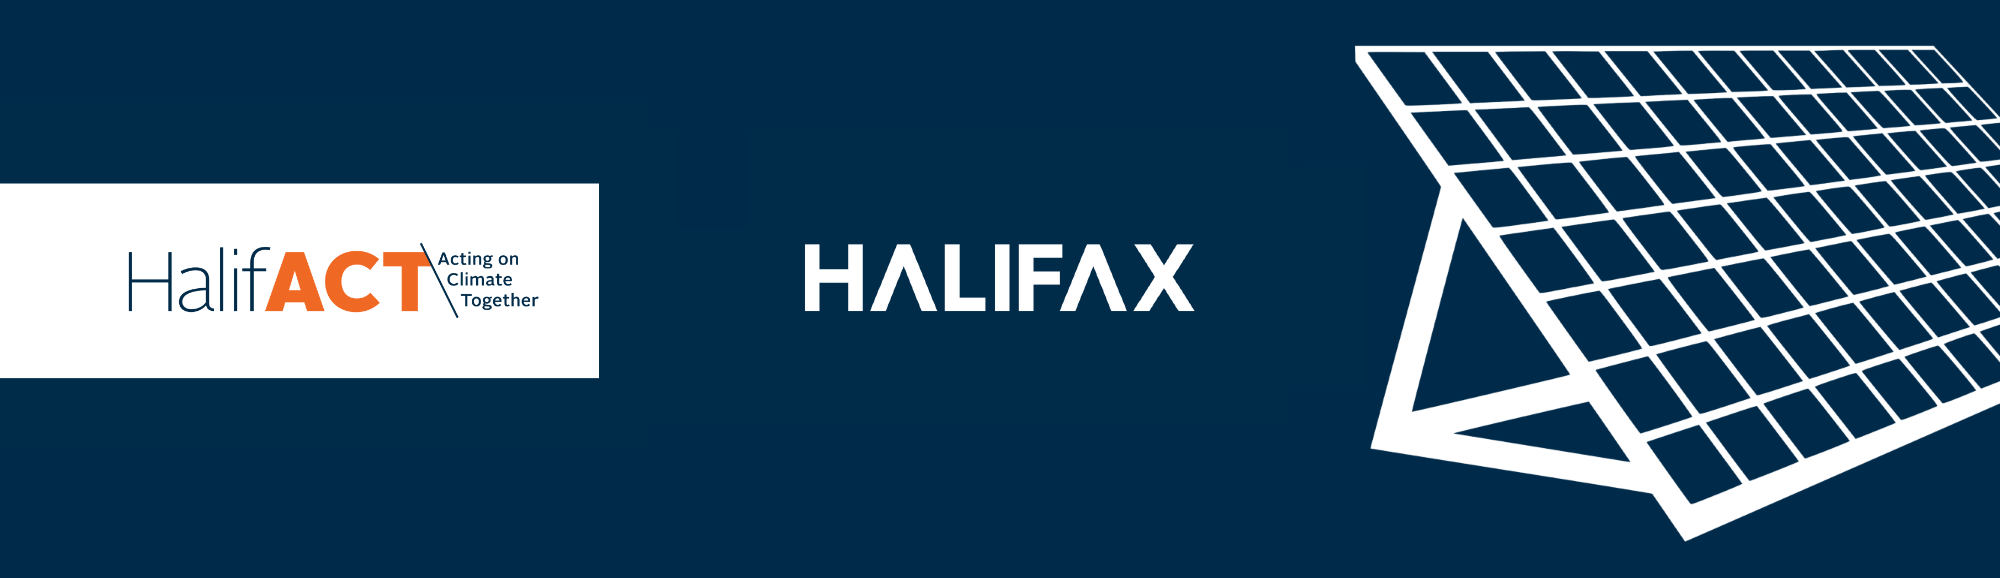 Halifax and HalifACT logos with a solar panel illustration on the right